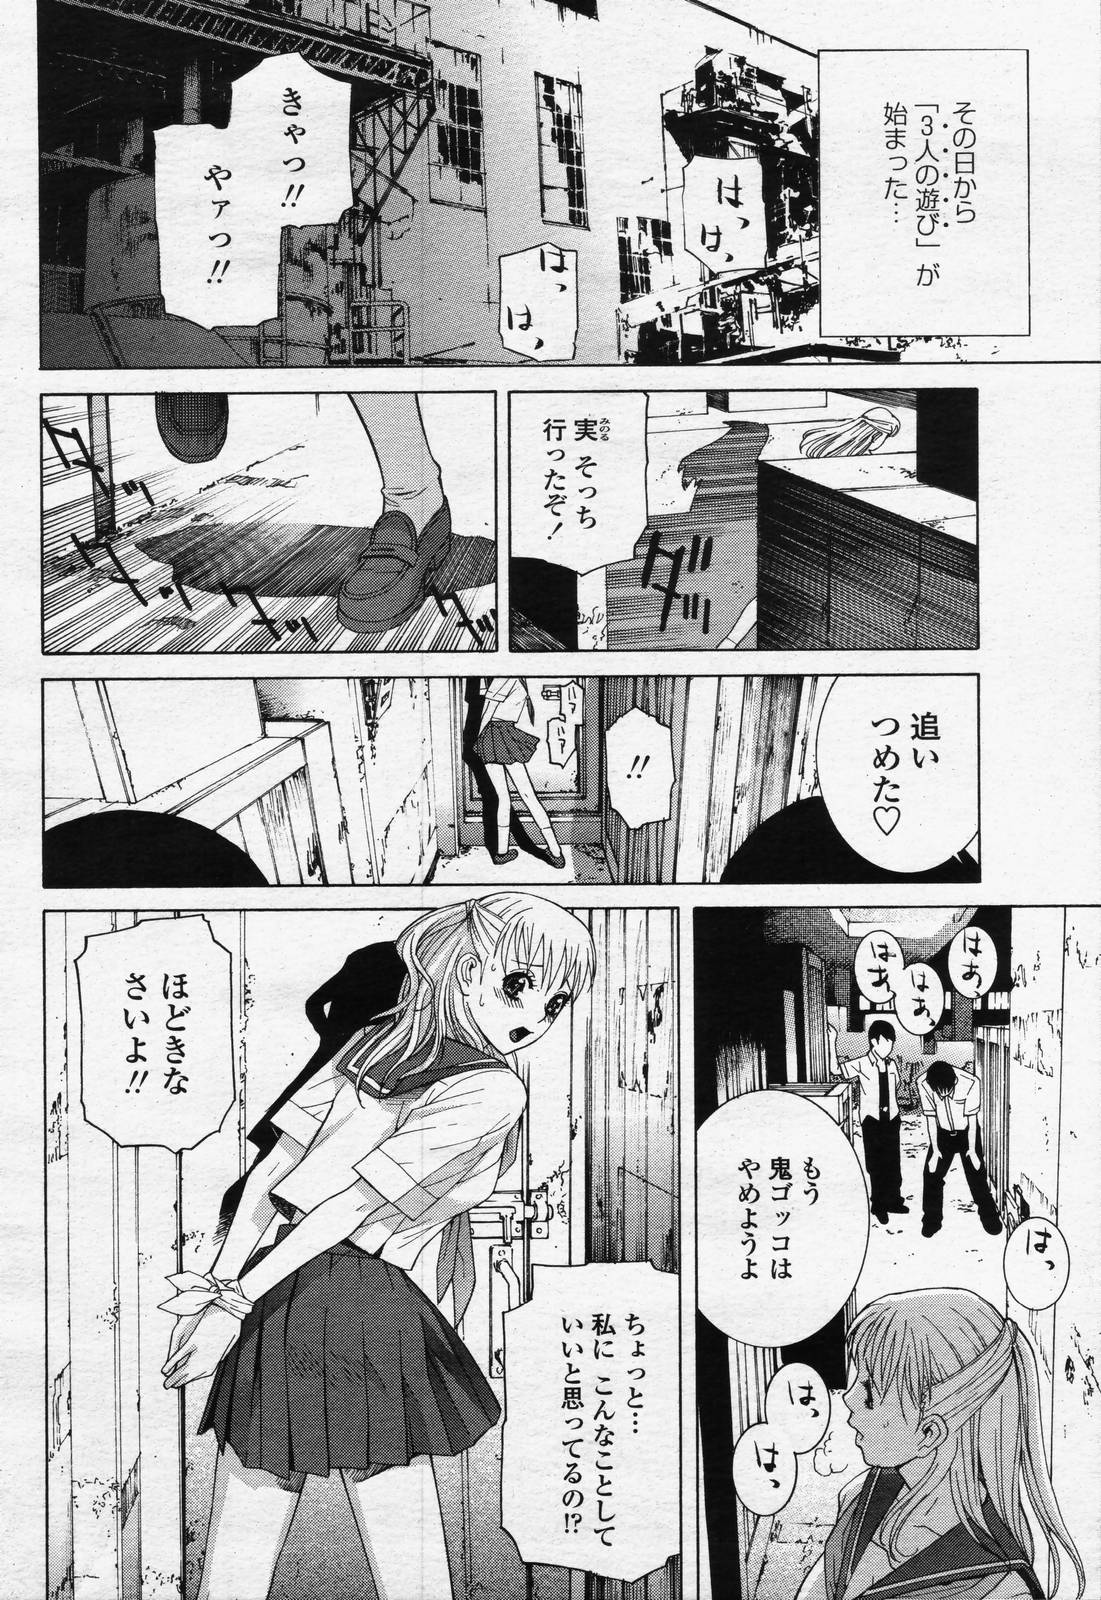 COMIC Momohime 2006-07 page 46 full